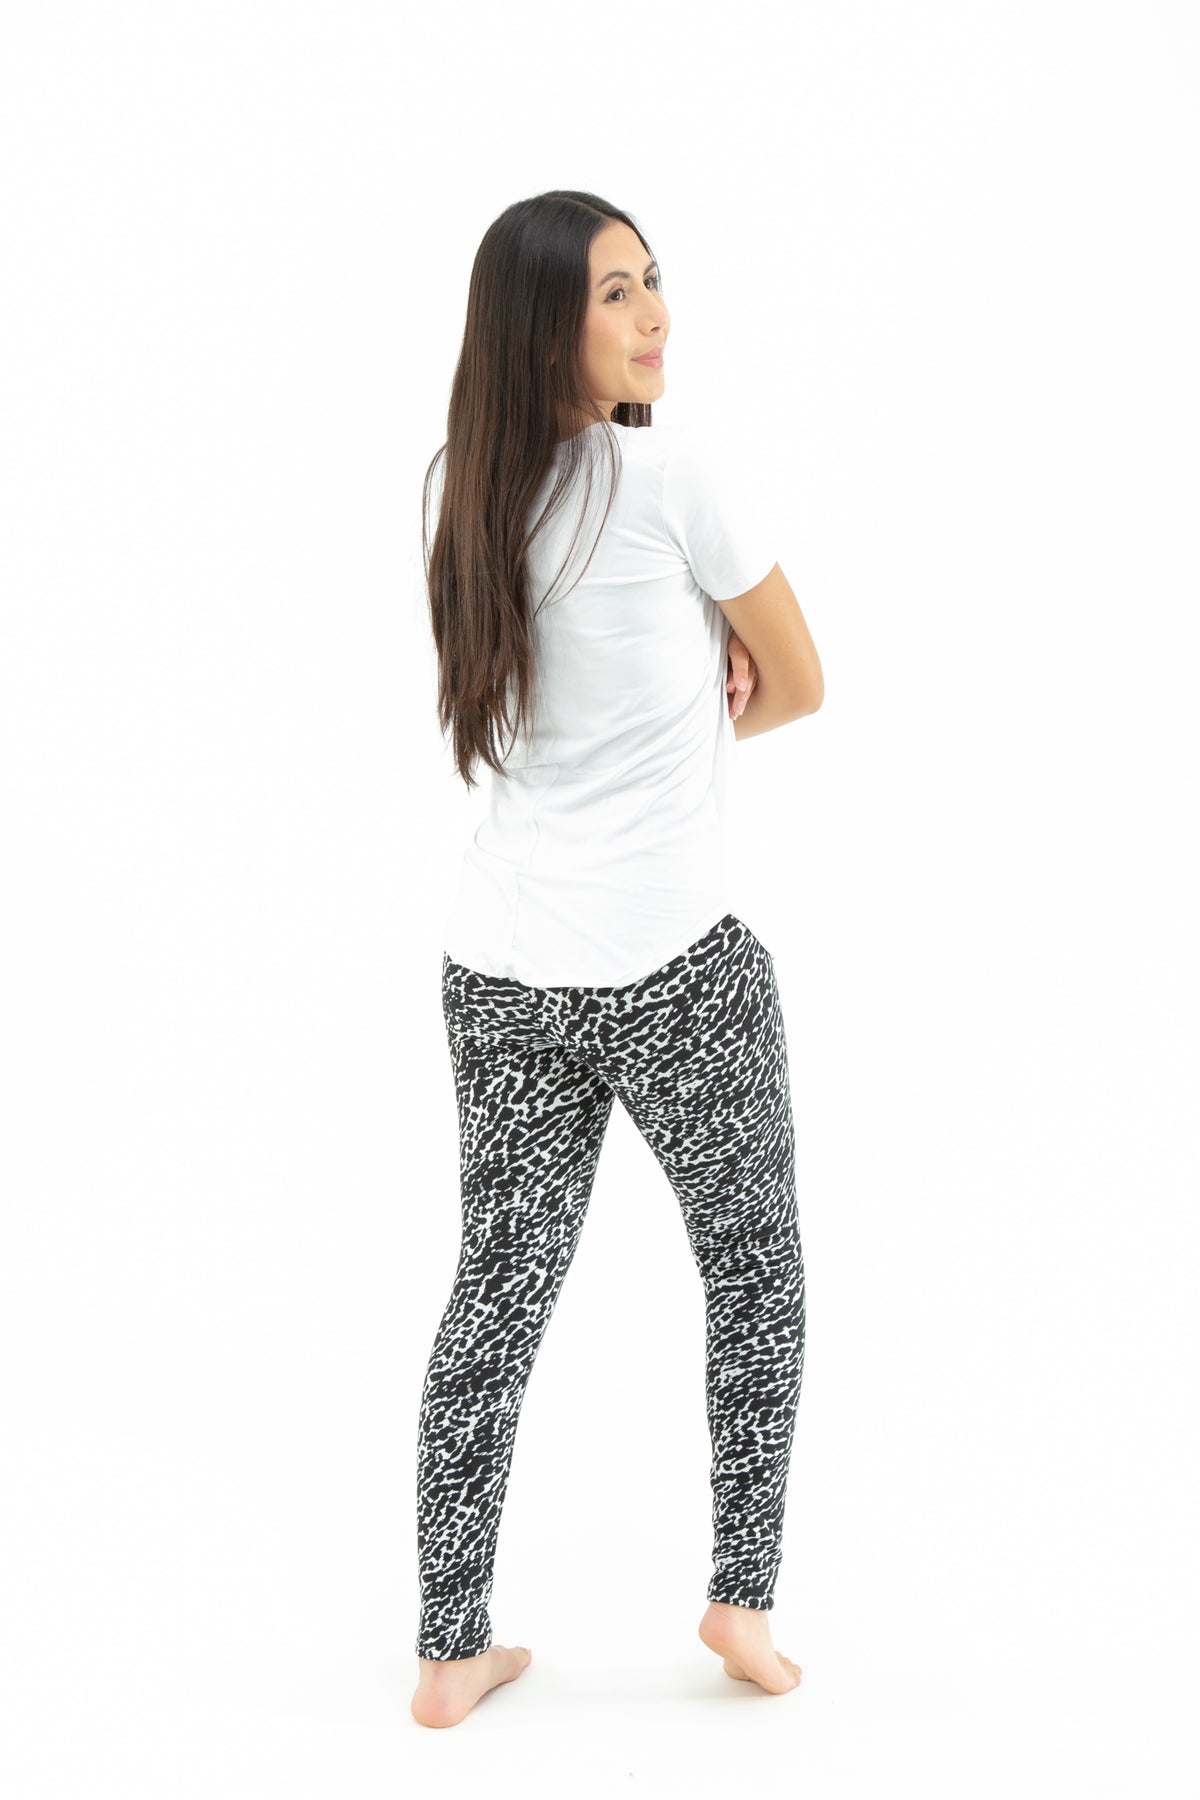 Balance Collection White Leopard Active Small Leggings - $6 - From Savannah